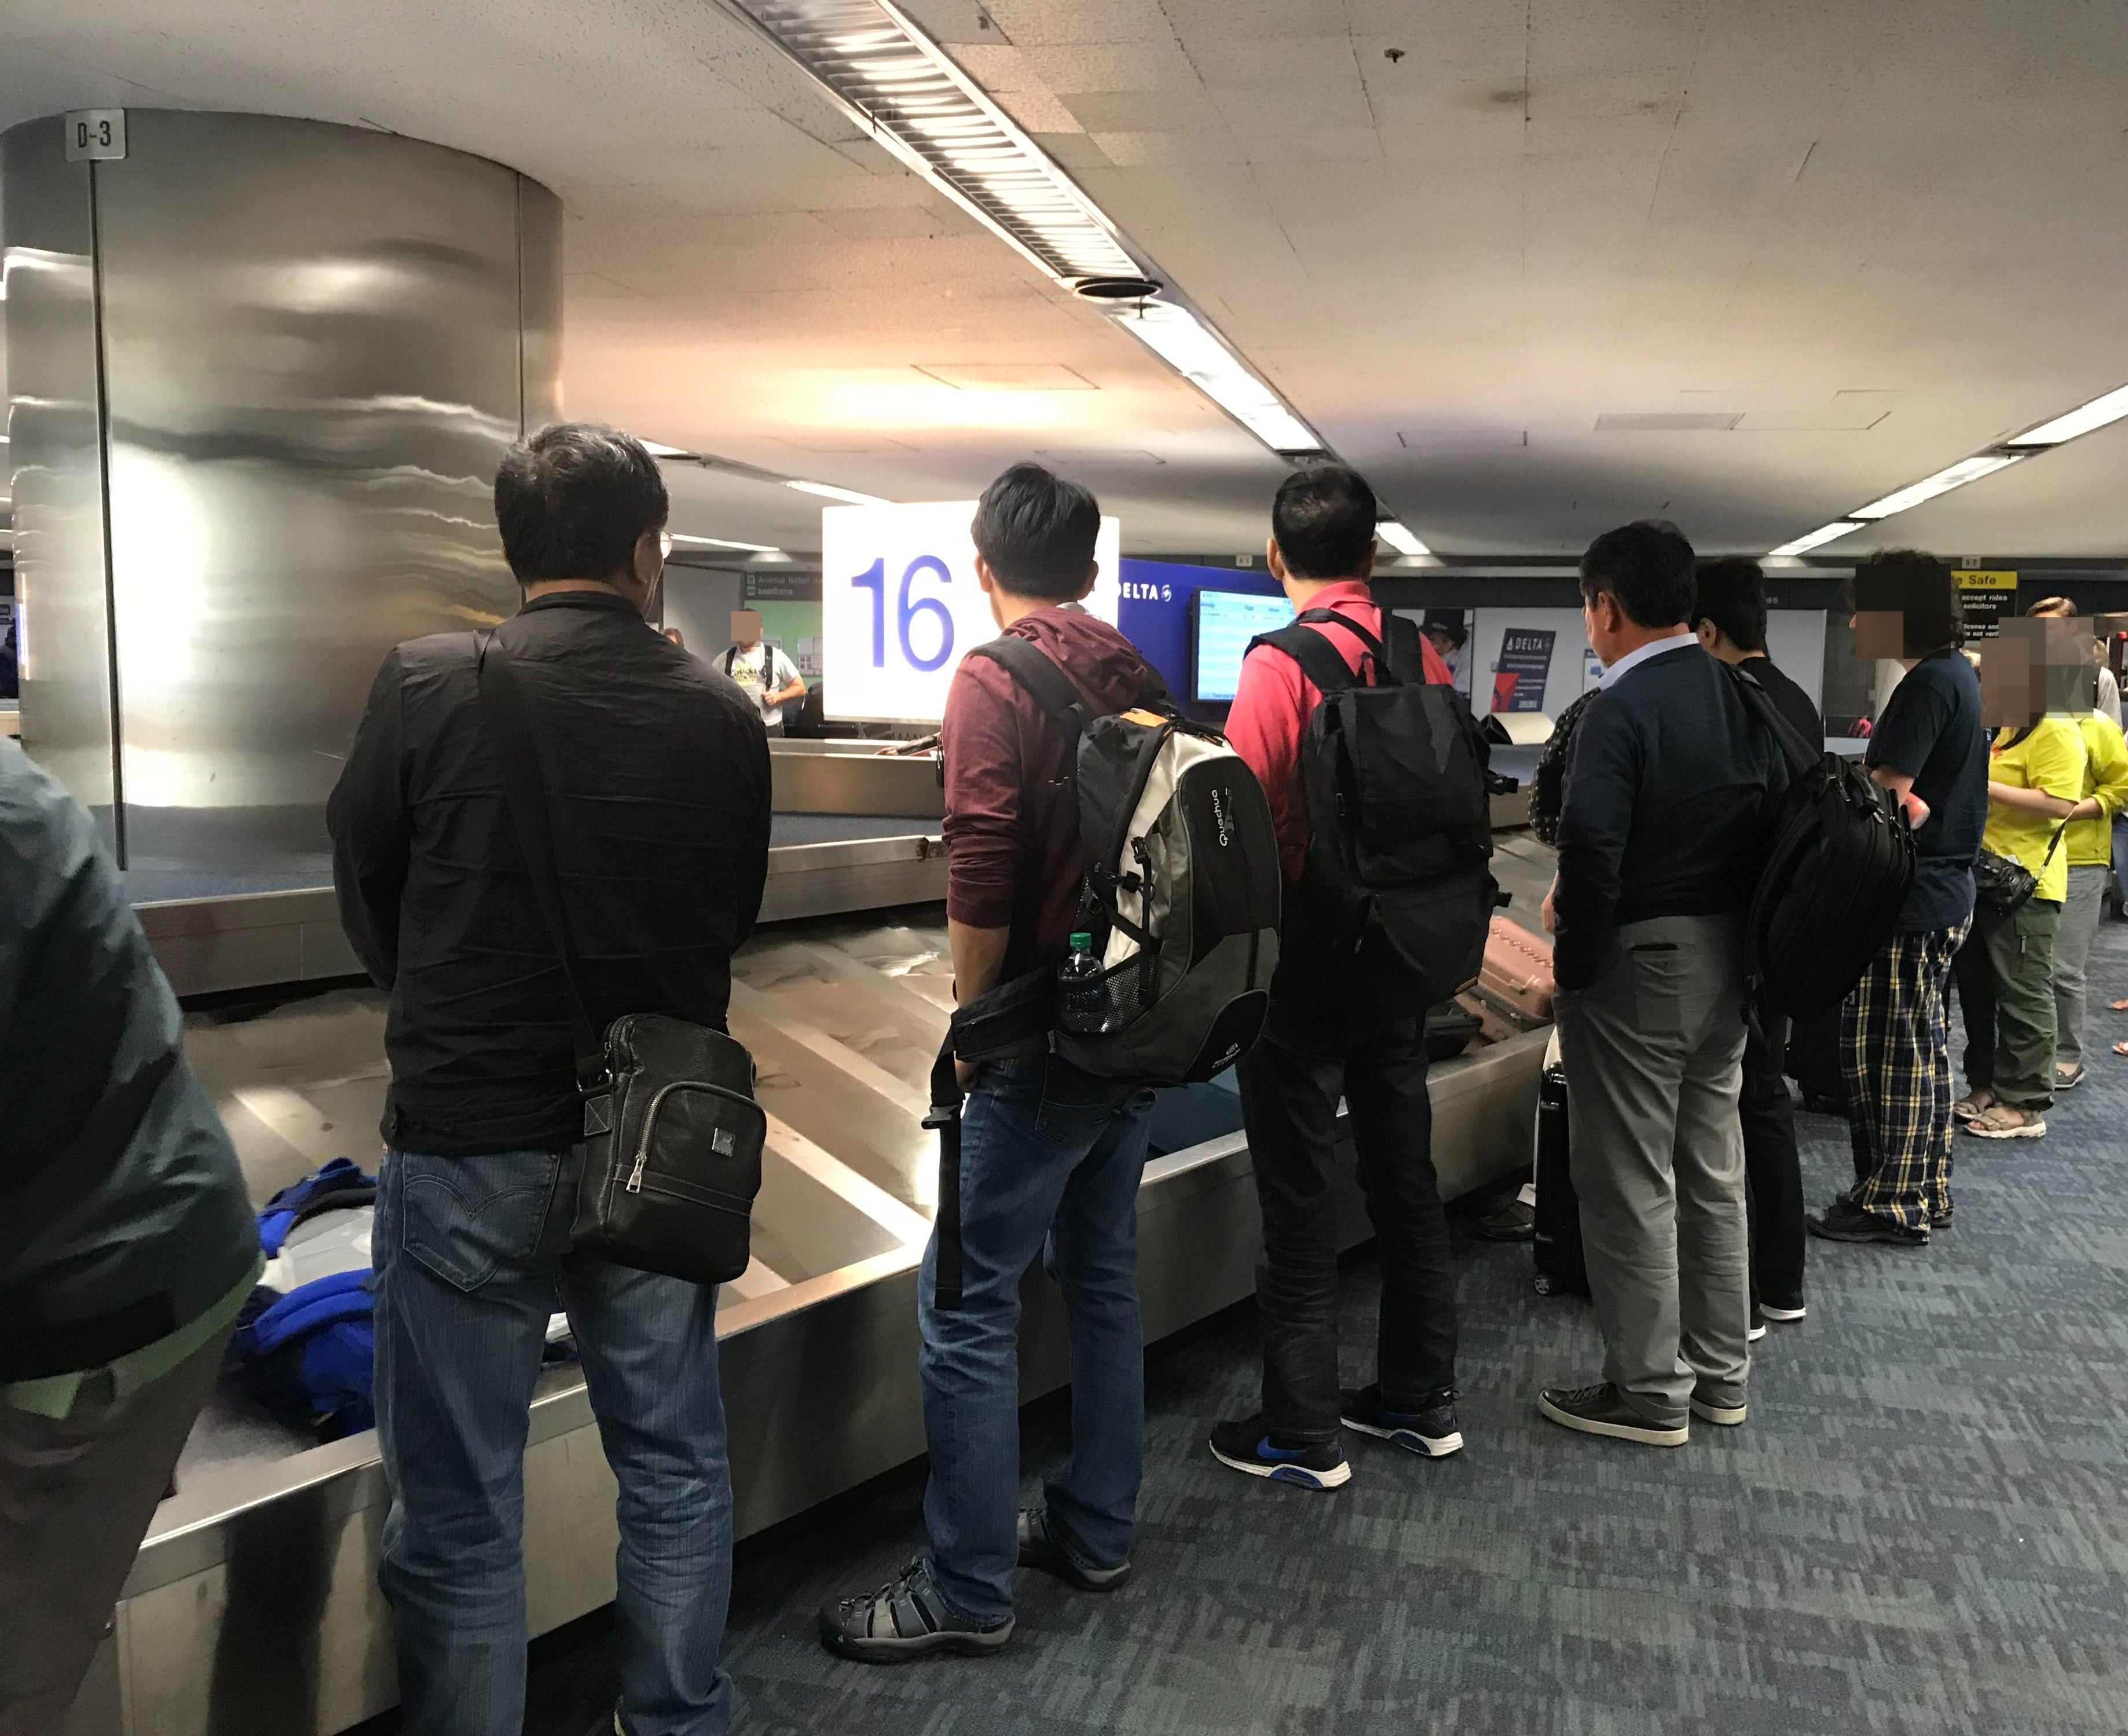 Passengers standing by a baggage carousel, waiting for luggage; some with backpacks